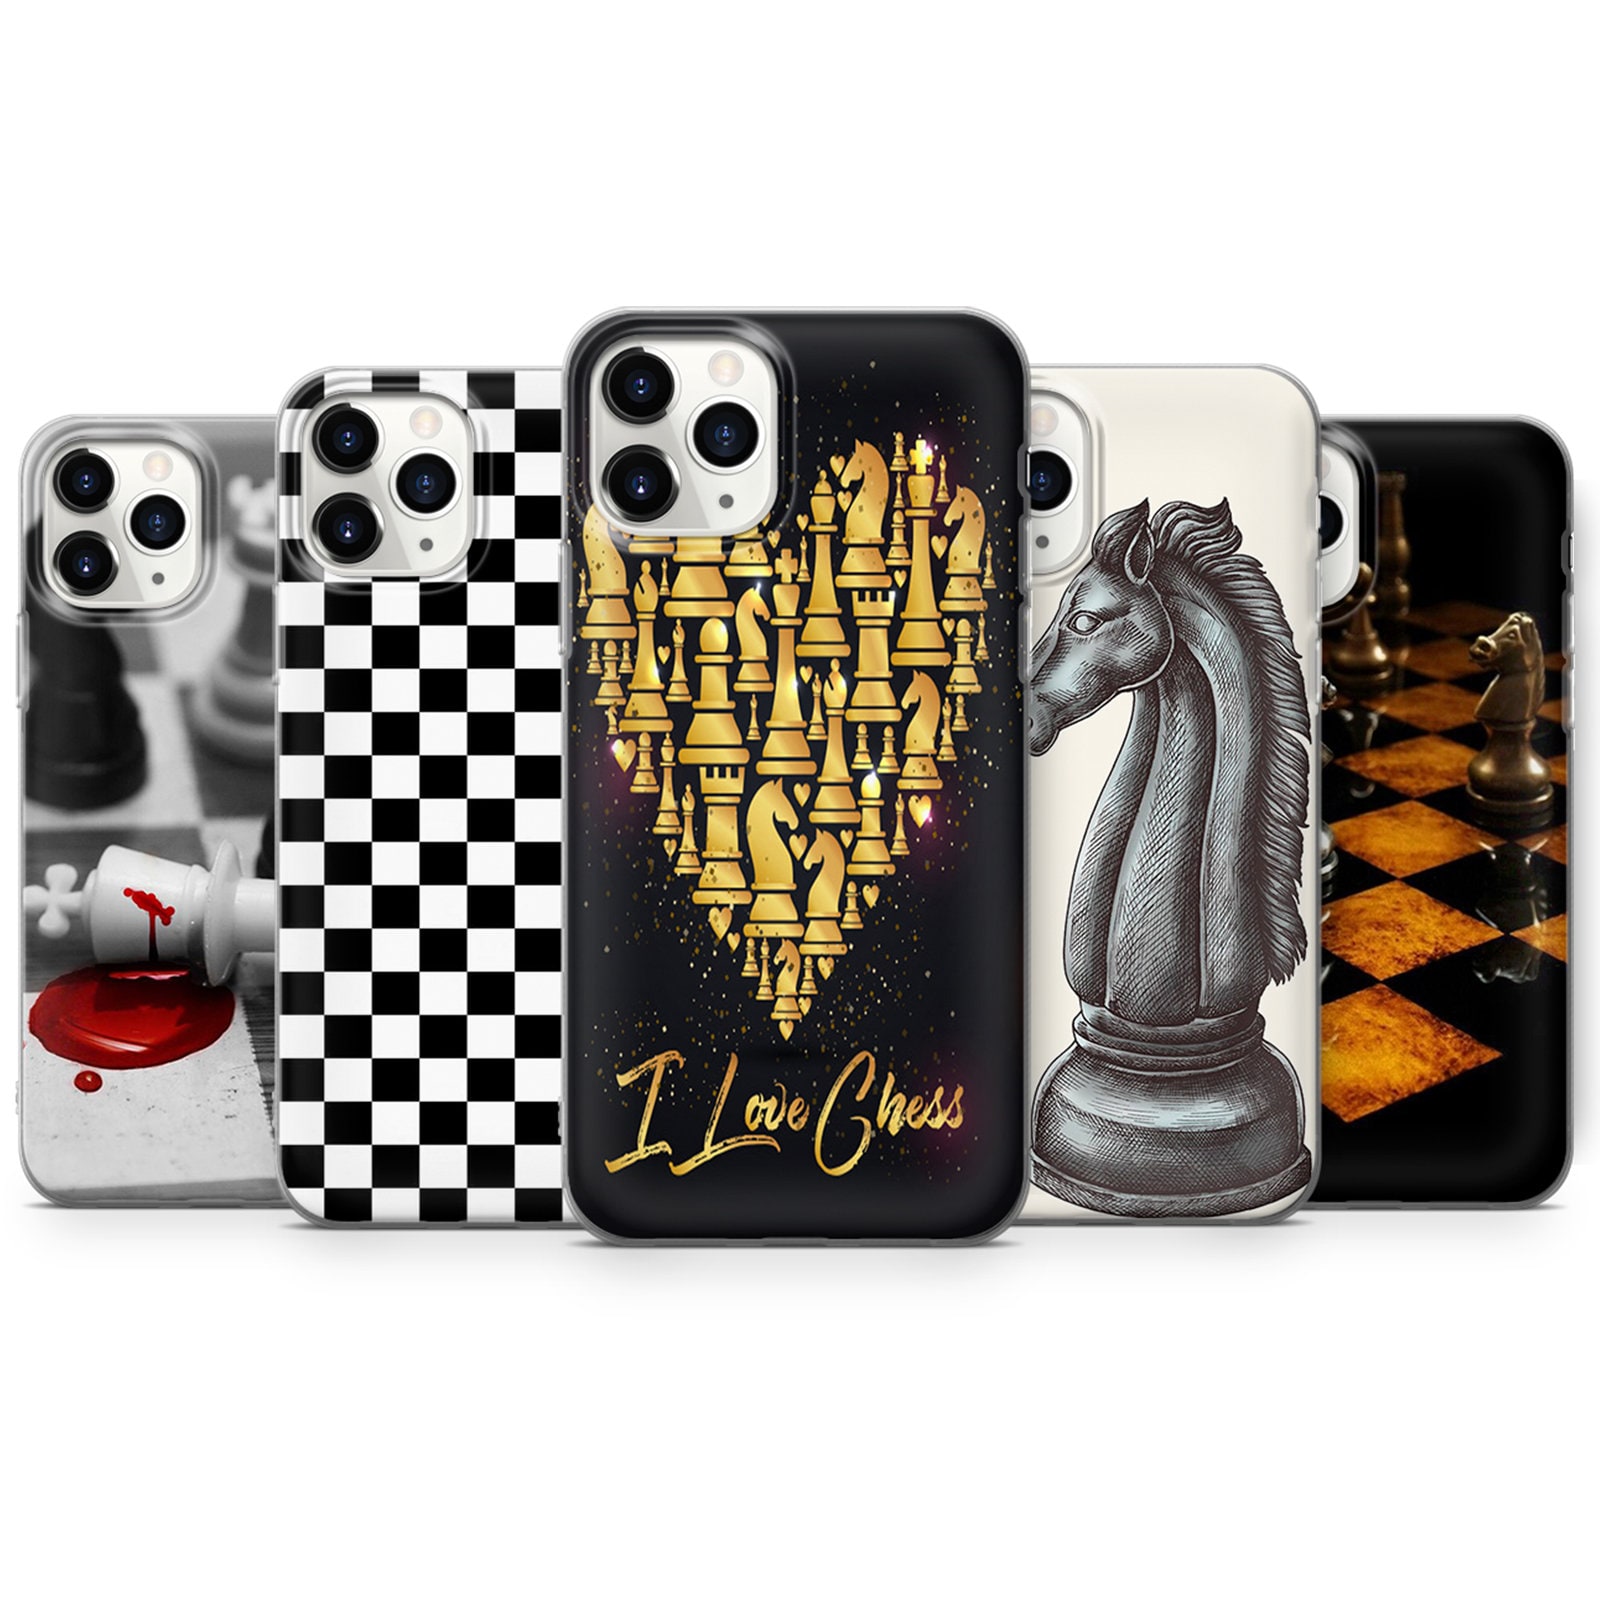  iPhone 12/12 Pro I'm thinking, Chess Pieces, Chess